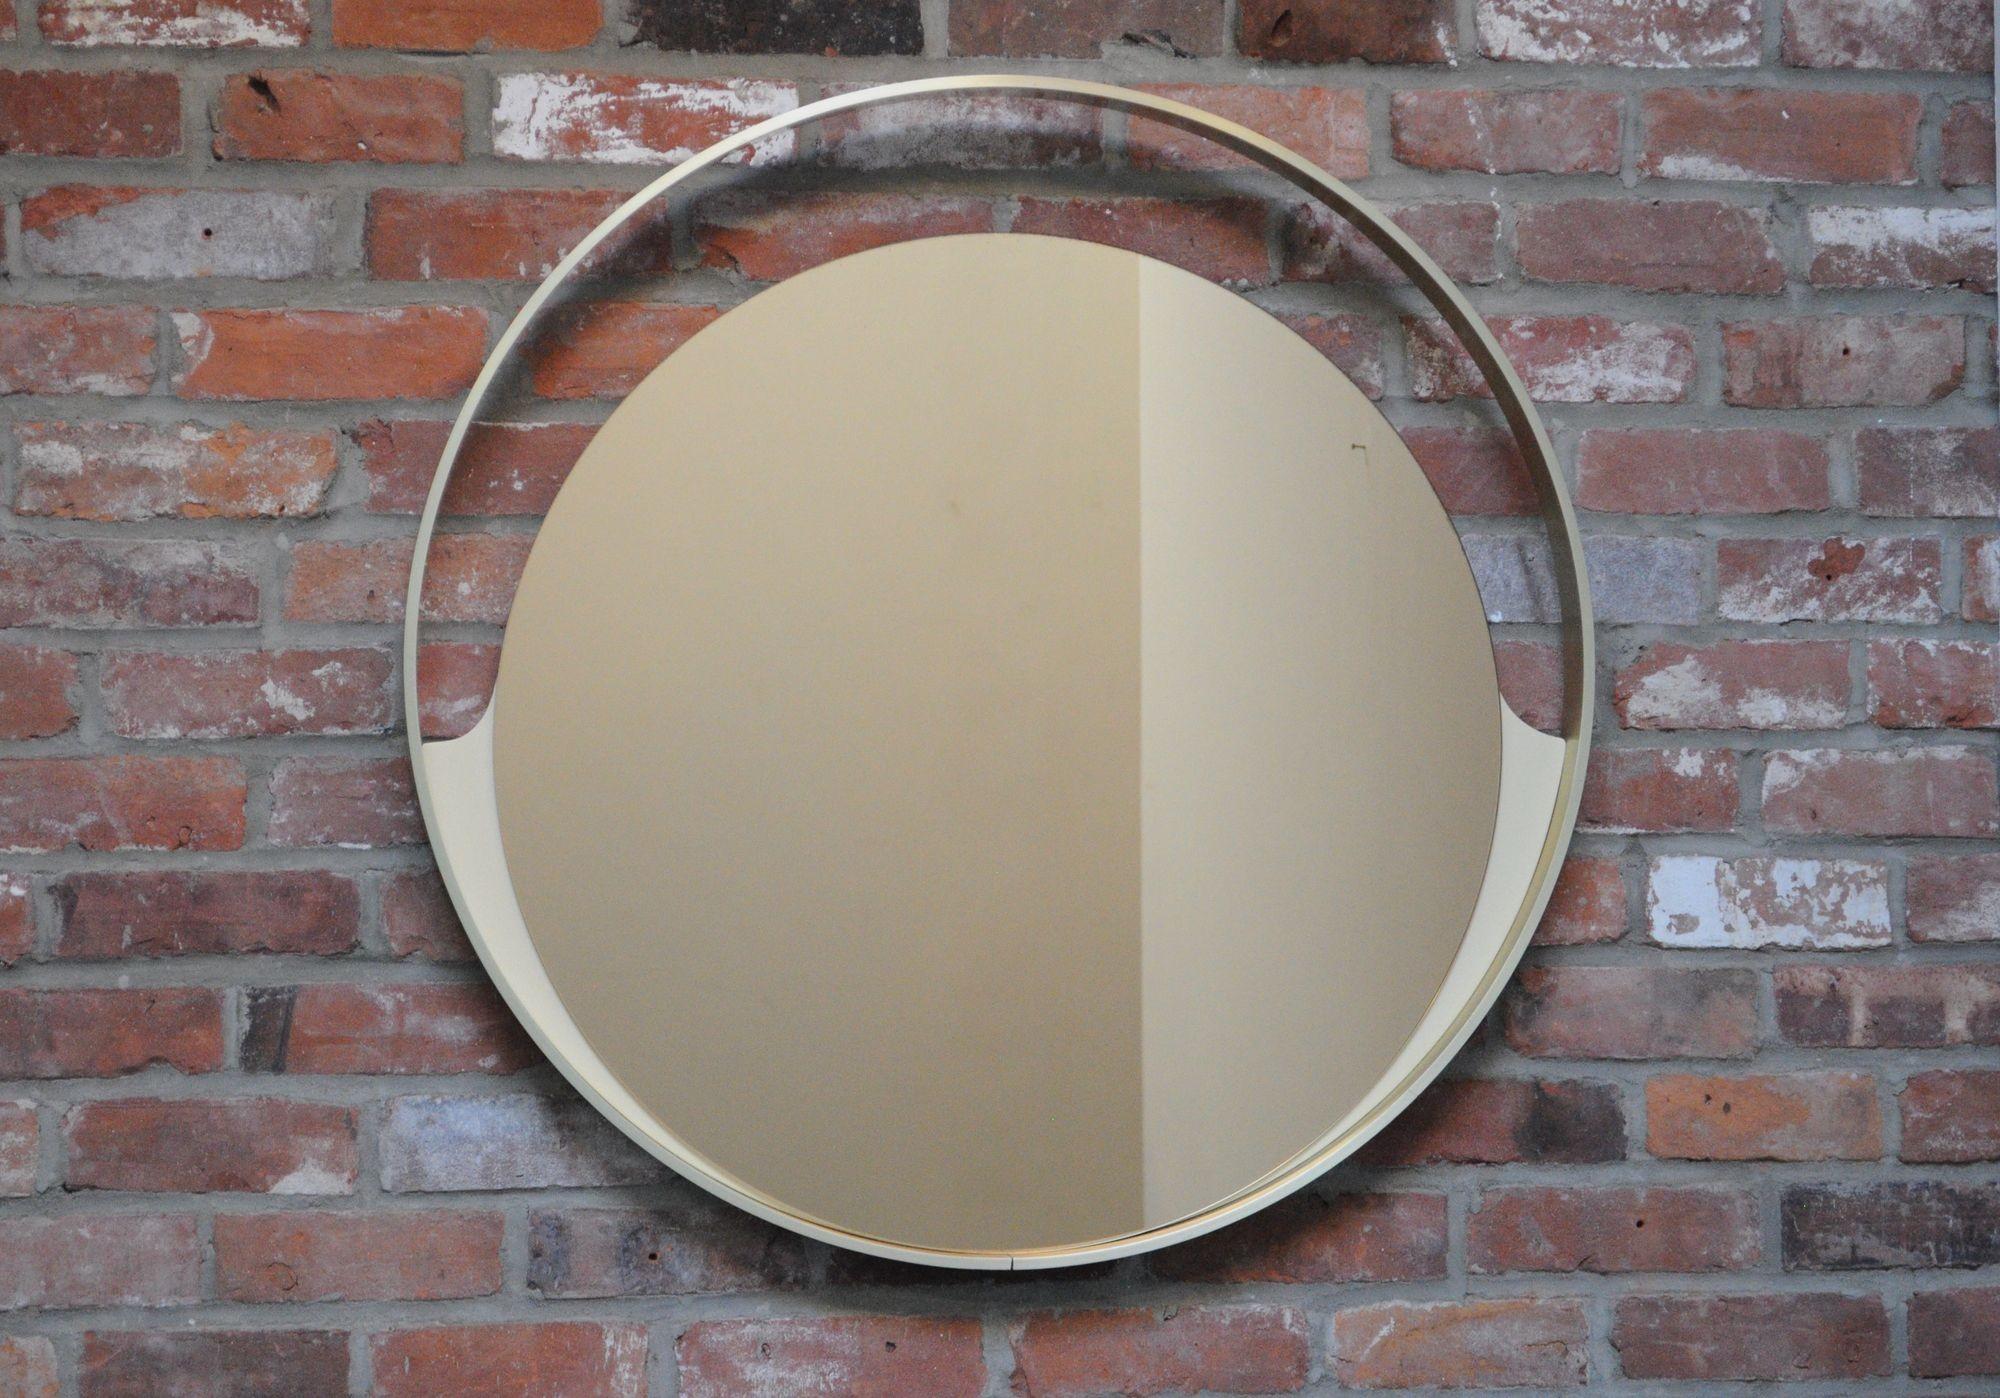 Rimadesio wall mirror composed of a gold anodized aluminum 'ring' frame with cream/ivory lacquered wood accents supporting a bronze-tinted mercury mirror glass plate (Desio, Italy, ca. 1960s).
Extremely well made incorporating quality materials